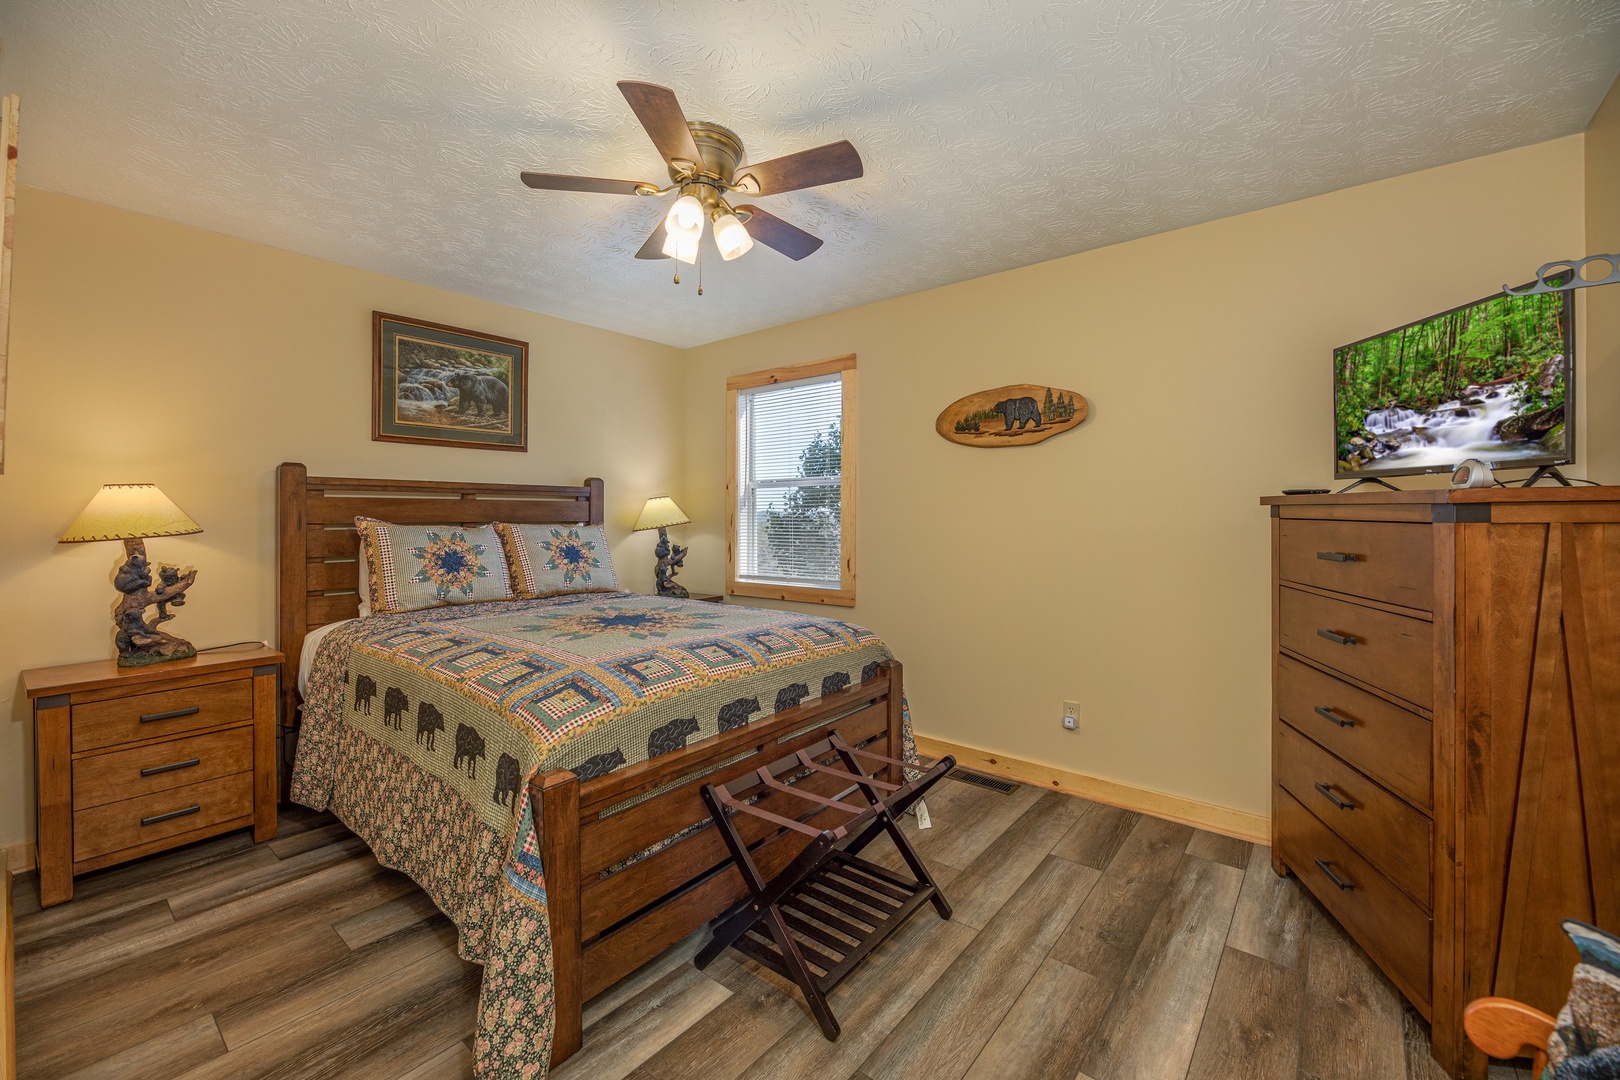 Bedroom with two night stands and lamps, dresser, and TV at Le Bear Chalet, a 7 bedroom cabin rental located in Gatlinburg